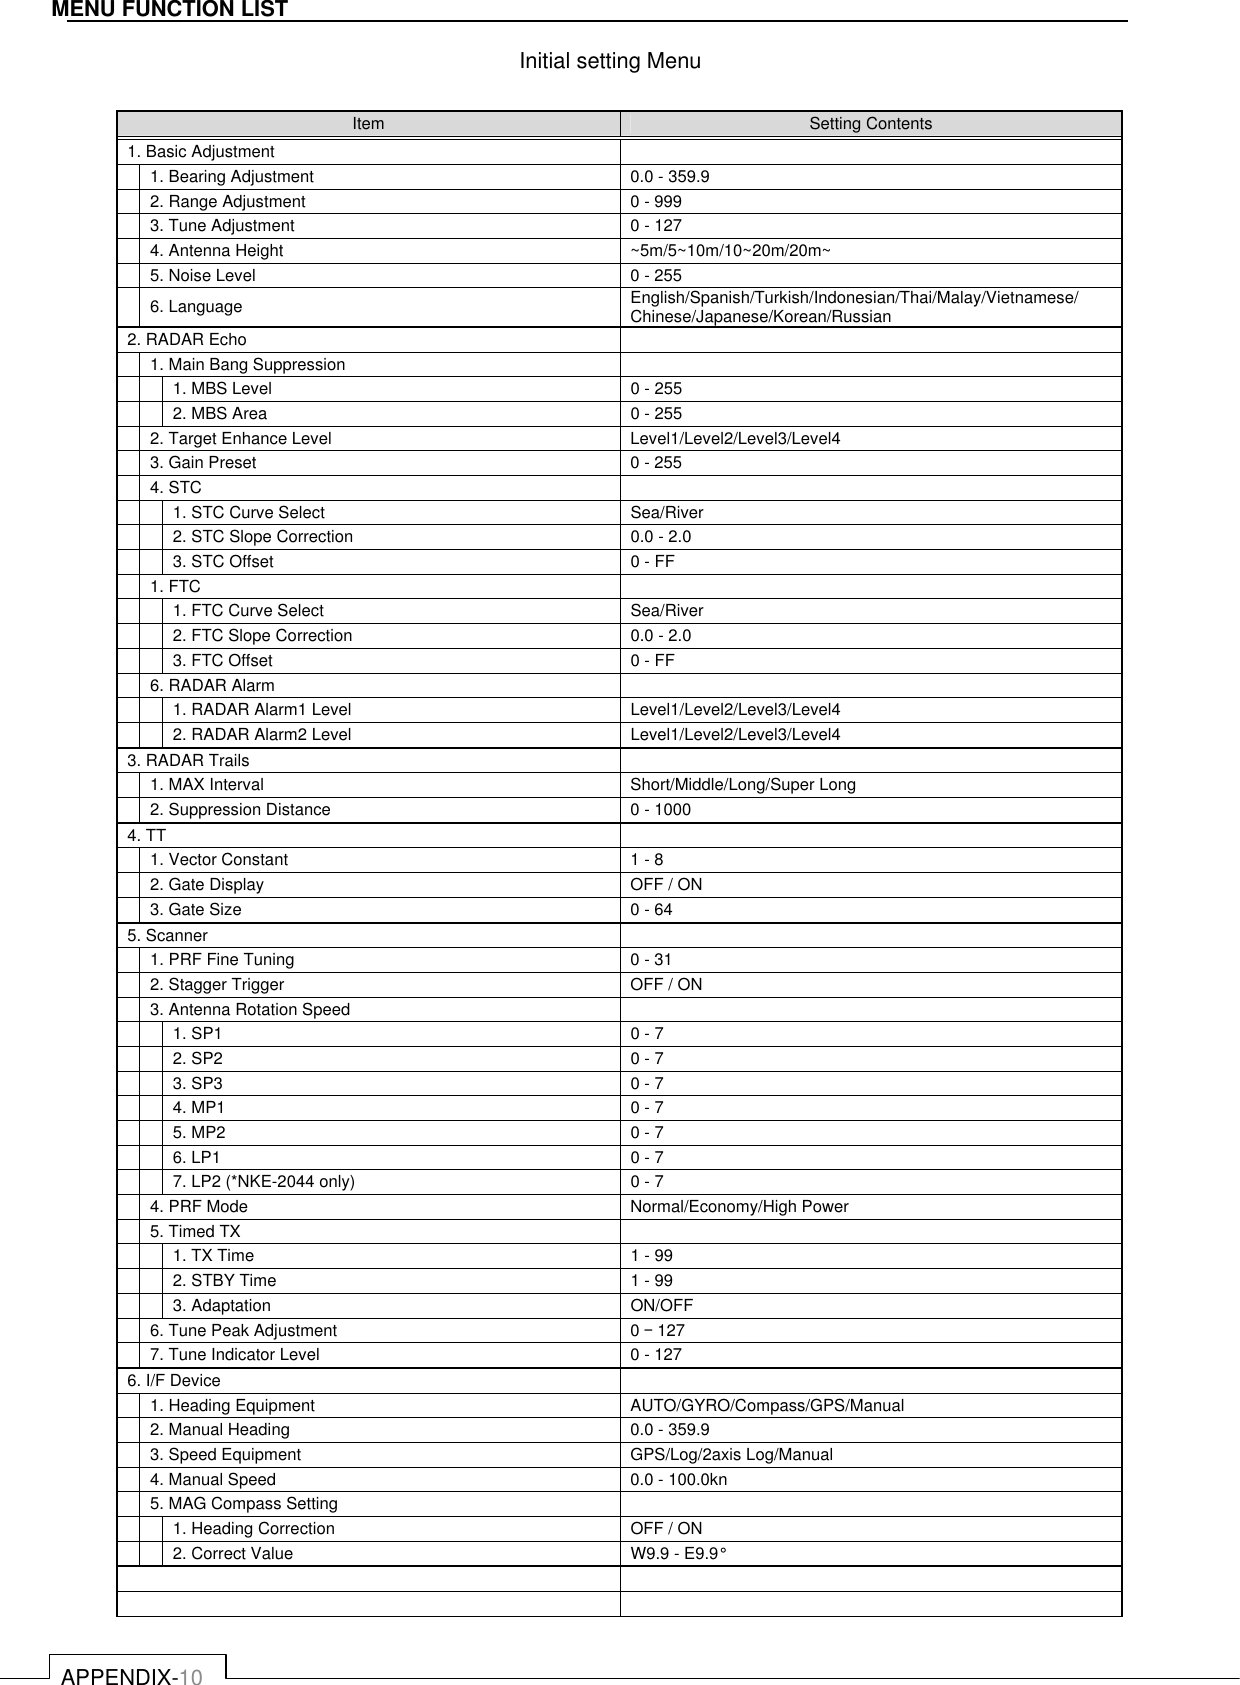   APPENDIX-10 MENU FUNCTION LIST Initial setting Menu  Item  Setting Contents 1. Basic Adjustment    1. Bearing Adjustment  0.0 - 359.9  2. Range Adjustment  0 - 999  3. Tune Adjustment  0 - 127  4. Antenna Height  ~5m/5~10m/10~20m/20m~  5. Noise Level  0 - 255  6. Language  English/Spanish/Turkish/Indonesian/Thai/Malay/Vietnamese/ Chinese/Japanese/Korean/Russian 2. RADAR Echo    1. Main Bang Suppression     1. MBS Level  0 - 255   2. MBS Area  0 - 255  2. Target Enhance Level  Level1/Level2/Level3/Level4  3. Gain Preset  0 - 255  4. STC     1. STC Curve Select  Sea/River   2. STC Slope Correction  0.0 - 2.0   3. STC Offset  0 - FF  1. FTC     1. FTC Curve Select  Sea/River   2. FTC Slope Correction  0.0 - 2.0   3. FTC Offset  0 - FF  6. RADAR Alarm     1. RADAR Alarm1 Level  Level1/Level2/Level3/Level4   2. RADAR Alarm2 Level  Level1/Level2/Level3/Level4 3. RADAR Trails    1. MAX Interval  Short/Middle/Long/Super Long  2. Suppression Distance  0 - 1000 4. TT    1. Vector Constant  1 - 8  2. Gate Display  OFF / ON  3. Gate Size  0 - 64 5. Scanner    1. PRF Fine Tuning  0 - 31  2. Stagger Trigger  OFF / ON  3. Antenna Rotation Speed     1. SP1  0 - 7   2. SP2  0 - 7   3. SP3  0 - 7   4. MP1  0 - 7   5. MP2  0 - 7   6. LP1  0 - 7   7. LP2 (*NKE-2044 only)    0 - 7  4. PRF Mode  Normal/Economy/High Power  5. Timed TX     1. TX Time  1 - 99   2. STBY Time  1 - 99   3. Adaptation  ON/OFF  6. Tune Peak Adjustment  0 – 127  7. Tune Indicator Level  0 - 127 6. I/F Device    1. Heading Equipment  AUTO/GYRO/Compass/GPS/Manual  2. Manual Heading  0.0 - 359.9  3. Speed Equipment  GPS/Log/2axis Log/Manual  4. Manual Speed  0.0 - 100.0kn  5. MAG Compass Setting     1. Heading Correction  OFF / ON   2. Correct Value  W9.9 - E9.9°       